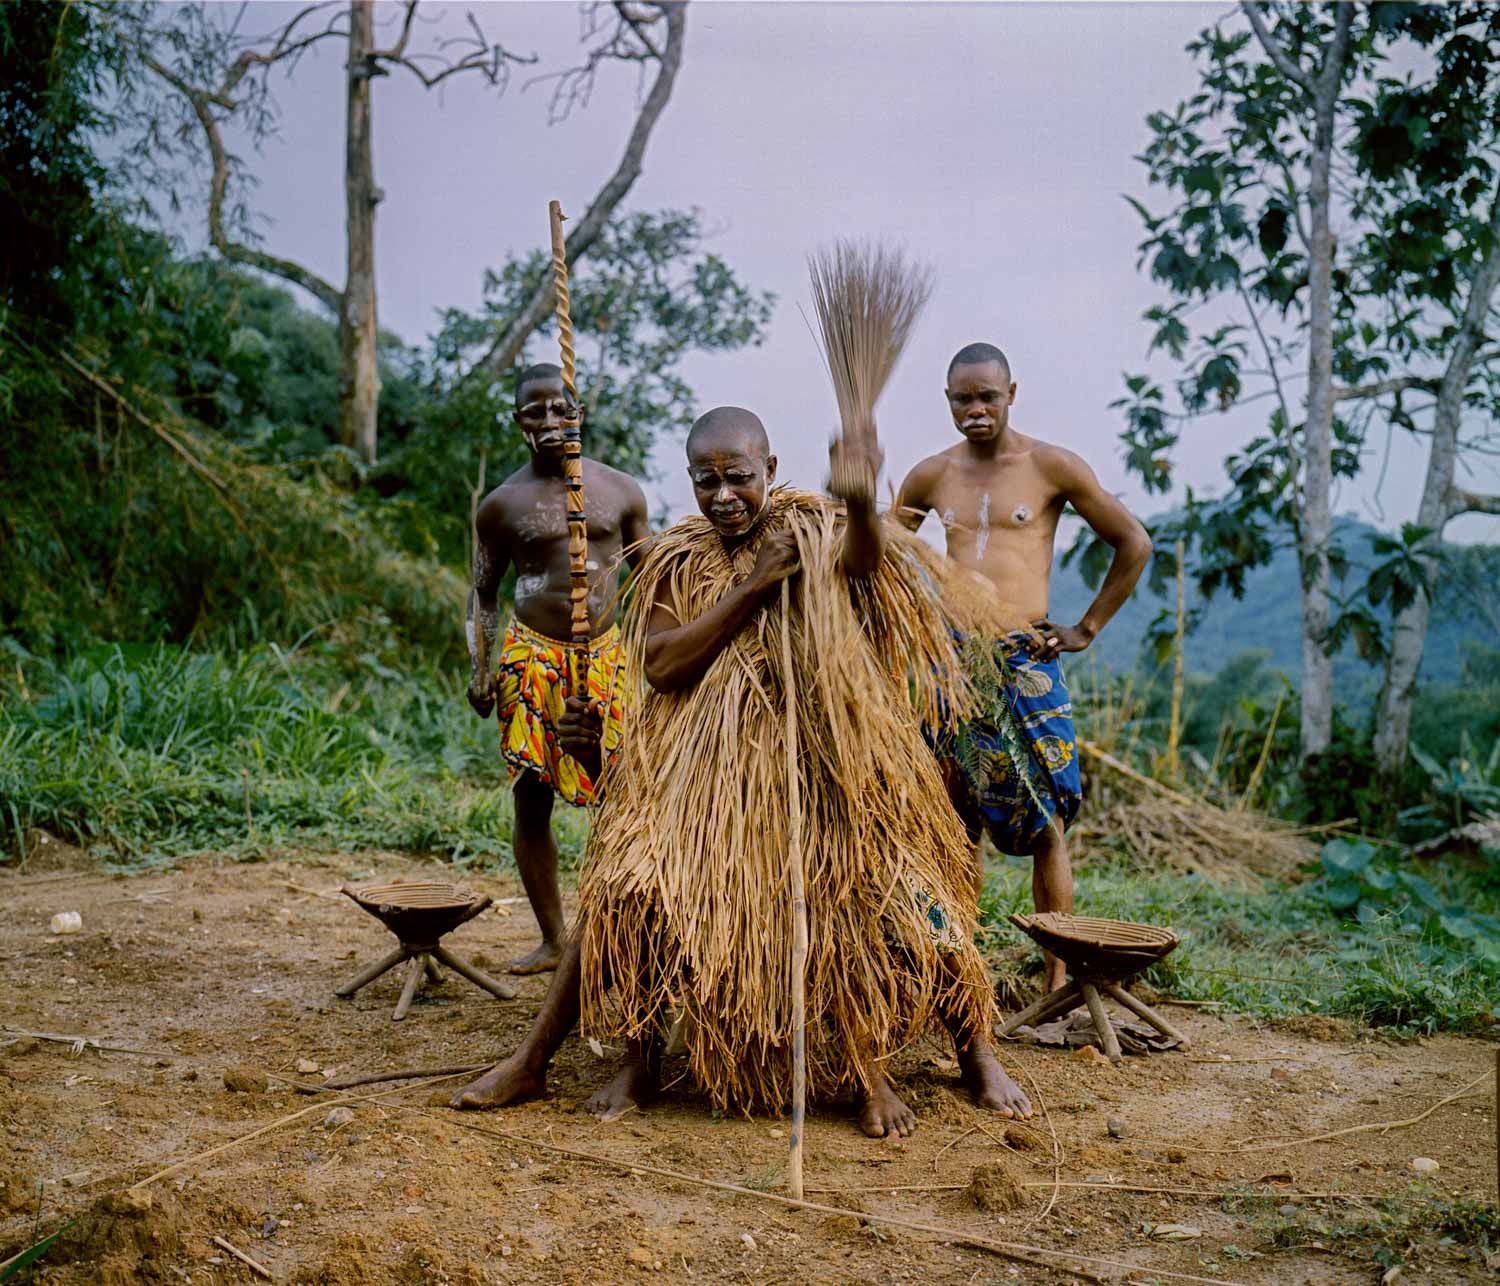  A traditional ceremony takes place outside the home of Lulingu’s King Asani Keka Mbezi. &nbsp;The Raia Mutomboki’s members are ethnically part of the Lega tribe, known for its intact traditions and witchcraft. &nbsp;The arrival of colonial Belgian p